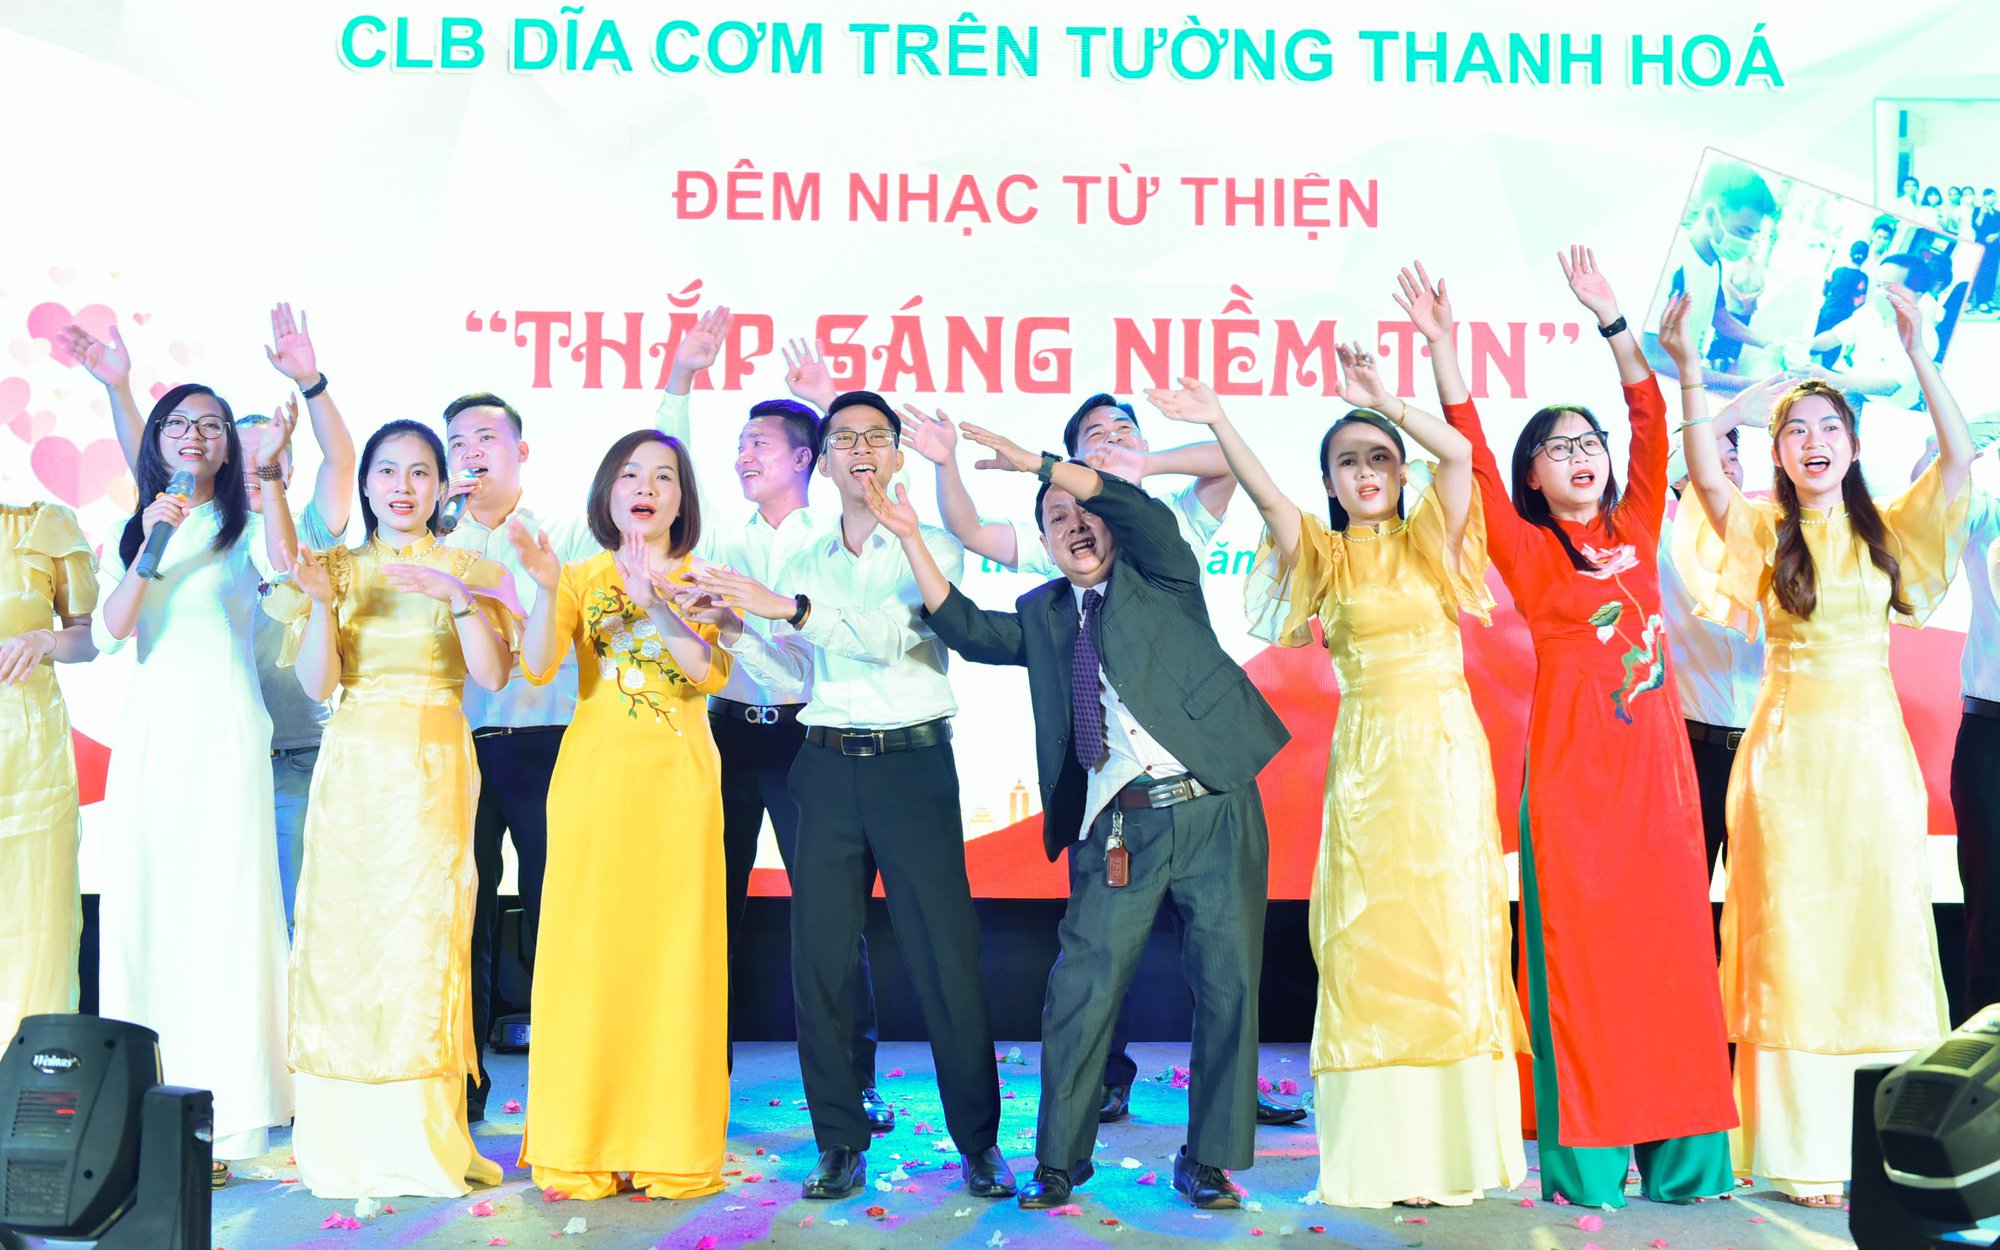 Doctors and nurses in Thanh Hoa transform into singers calling for charity to support poor patients - Photo 3.